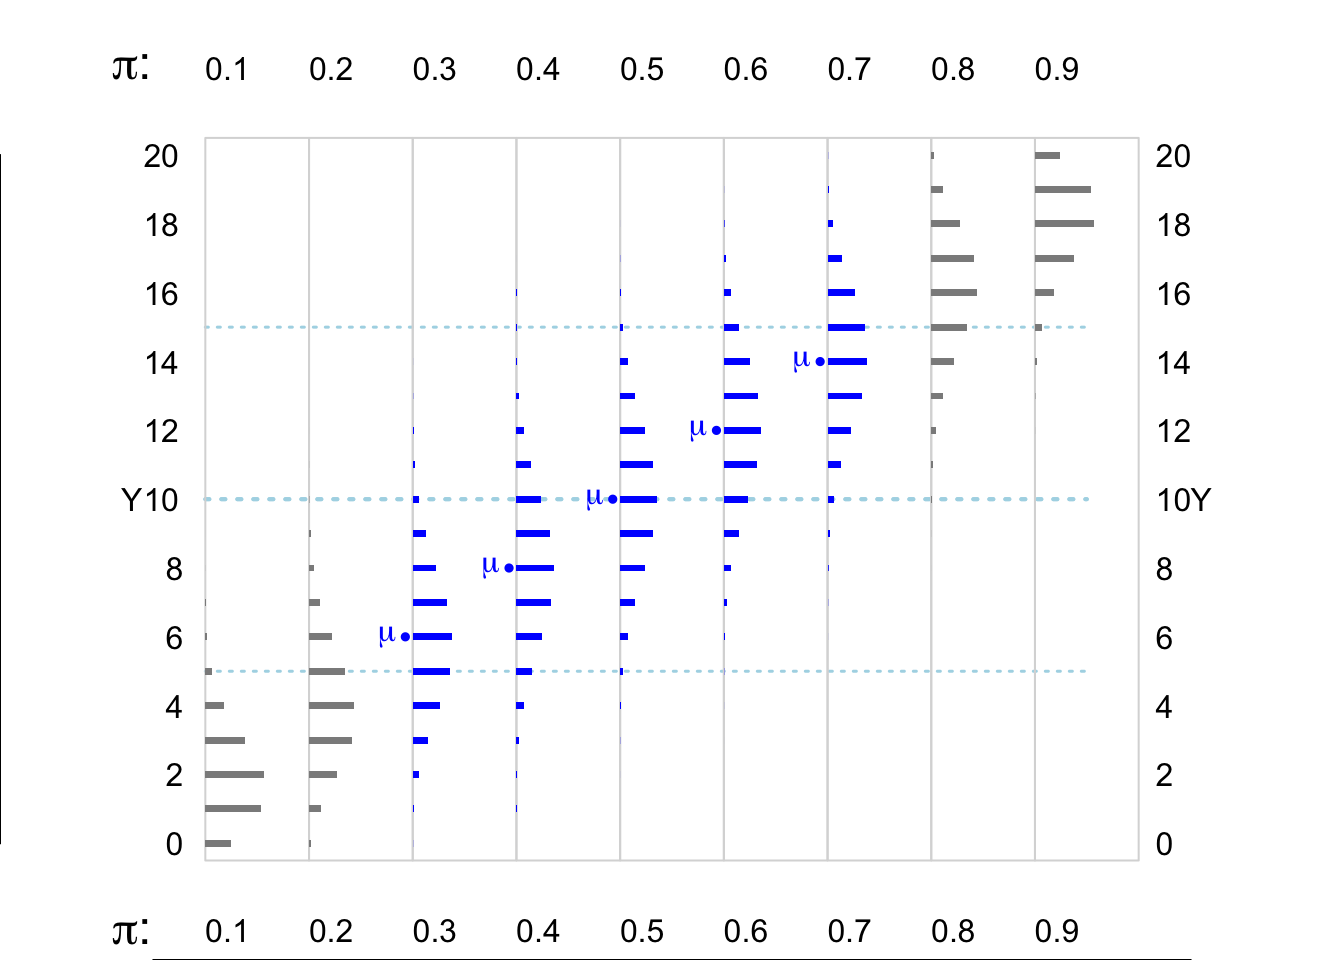 Various Binomial random variables/distributions, where n = 20. The dotted horizontal lines in light blue are 5 and 10 units in from the (0,n) boundaries. The distributions where the expected value E or mean, mu ( = n * Bernoulli Probability) is at least 5 units from the (0,n) boundaries are shown in blue.